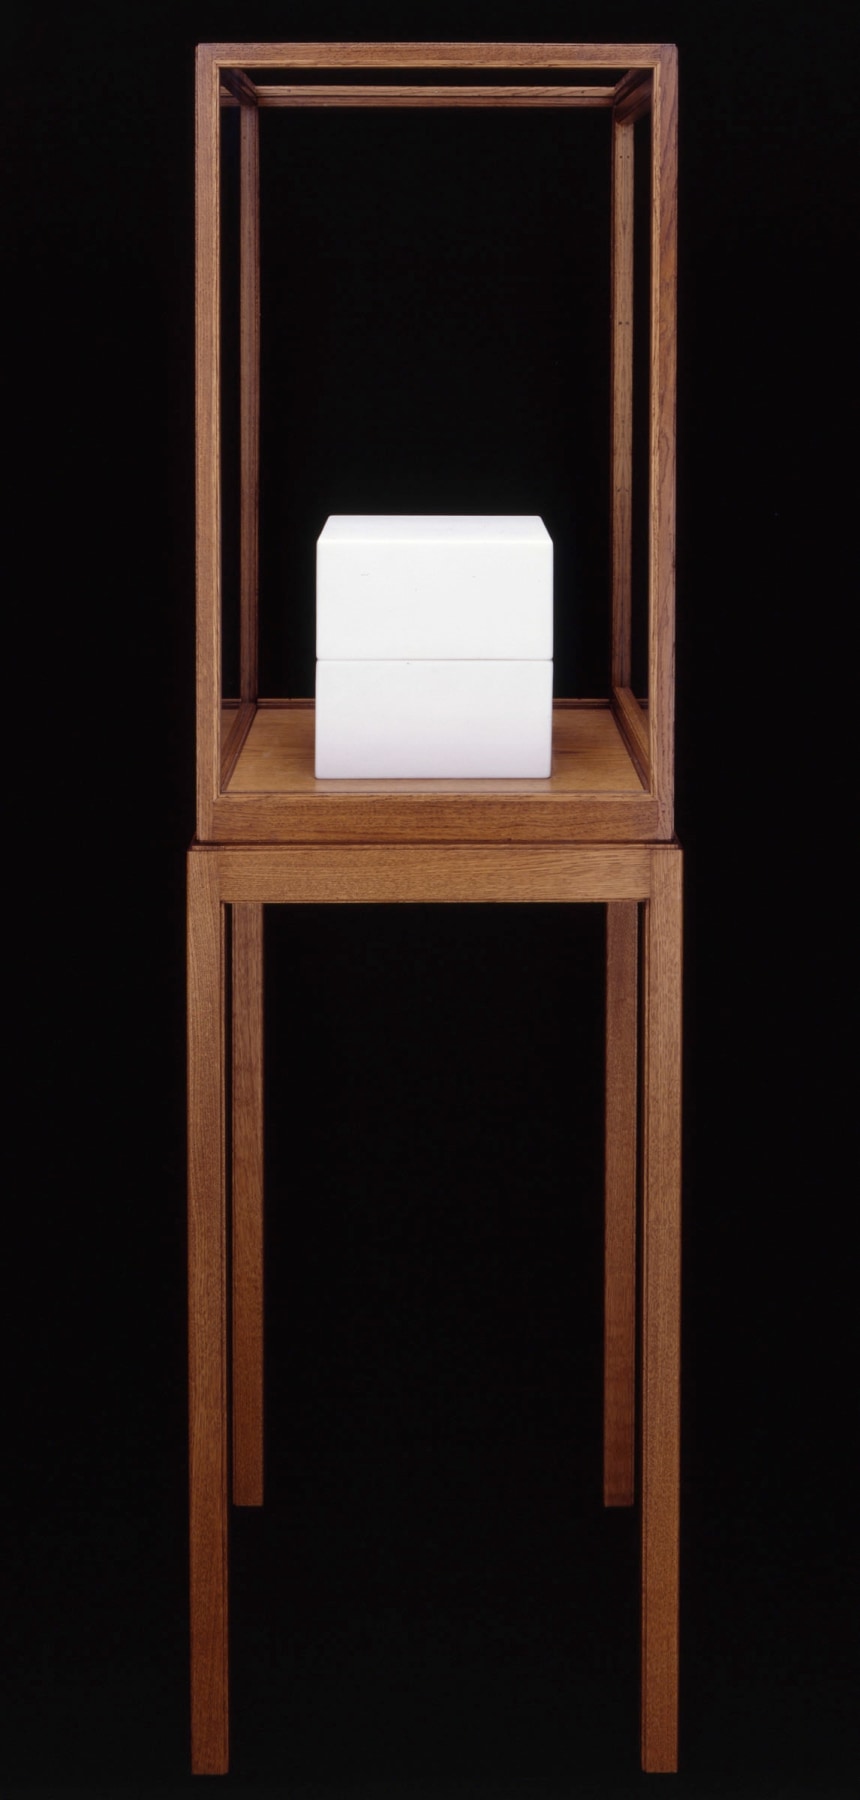 James Lee Byars

&amp;ldquo;The Cube Book&amp;rdquo;, 1989

Marble

Two parts, overall:

9 3/4 x 9 3/4 x 9 3/4 inches

25 x 25 x 25 cm

JB 123/2